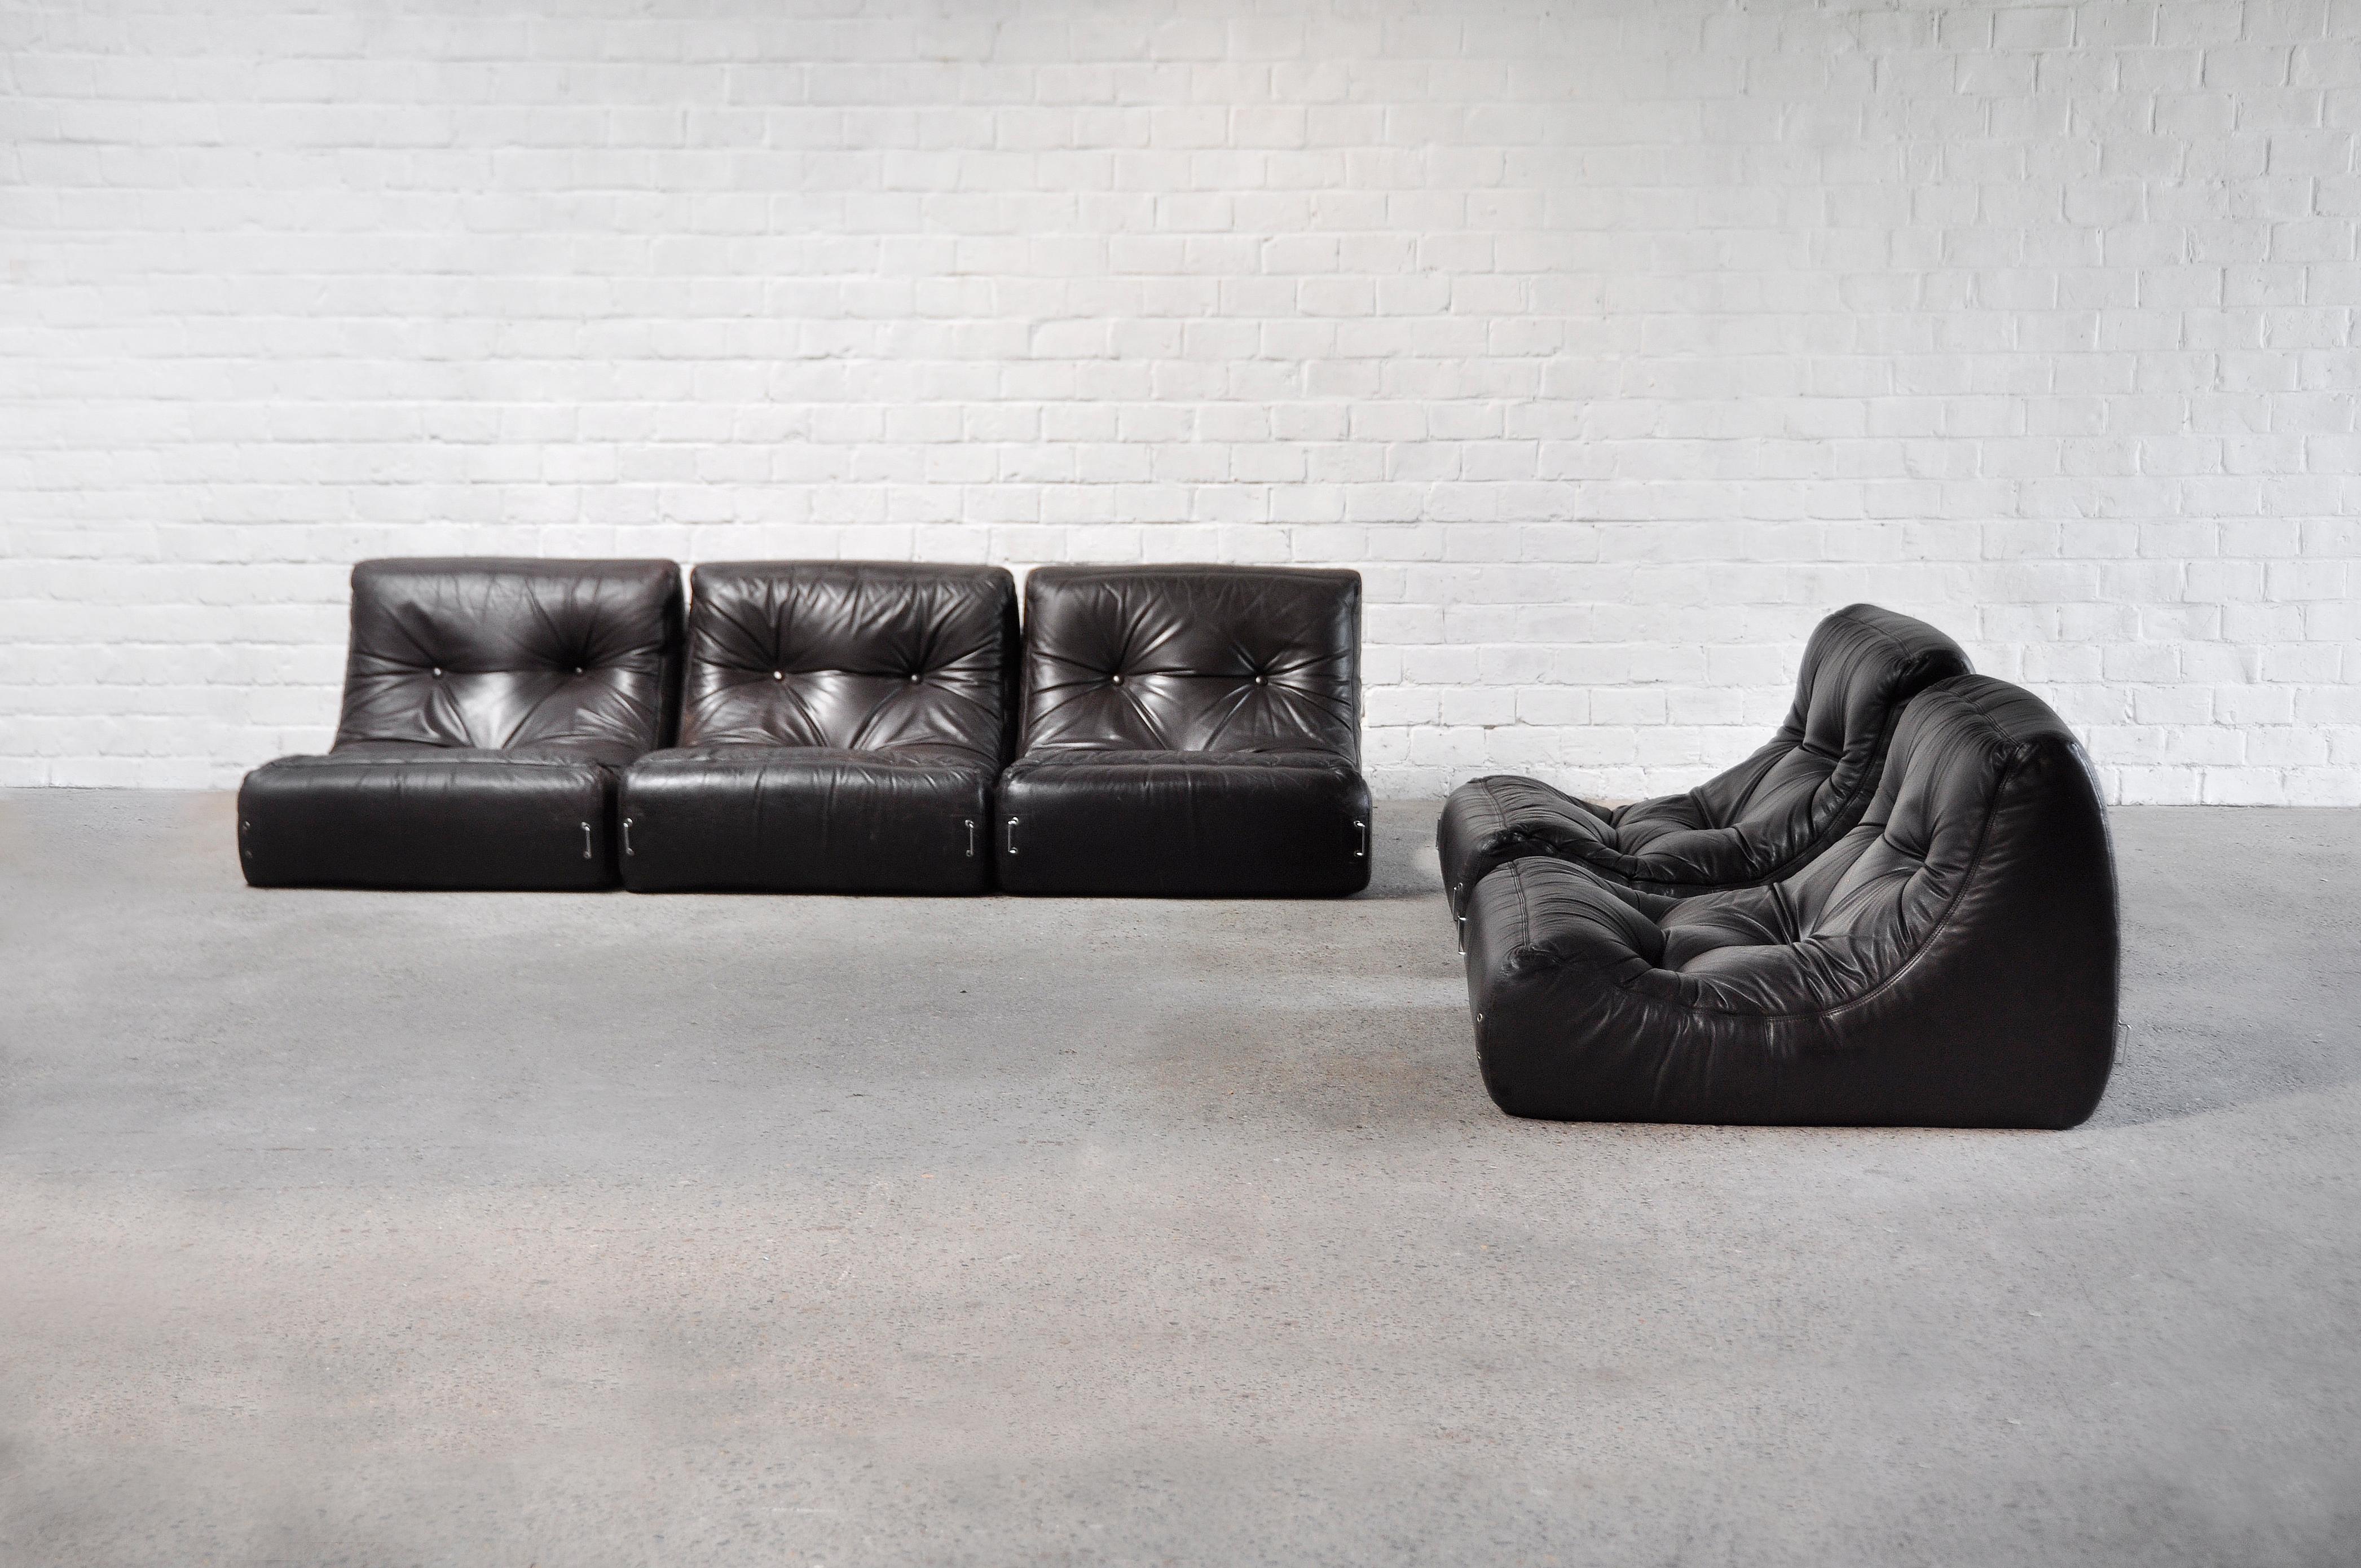 A unique 1970’s French modular sofa set consisting out of 5 individual pieces. Attributed to Michel Ducaroy, this set is made out of dark brown leather and sits low to the ground for a typical Space-Age or Modernist look. The seats are extremely